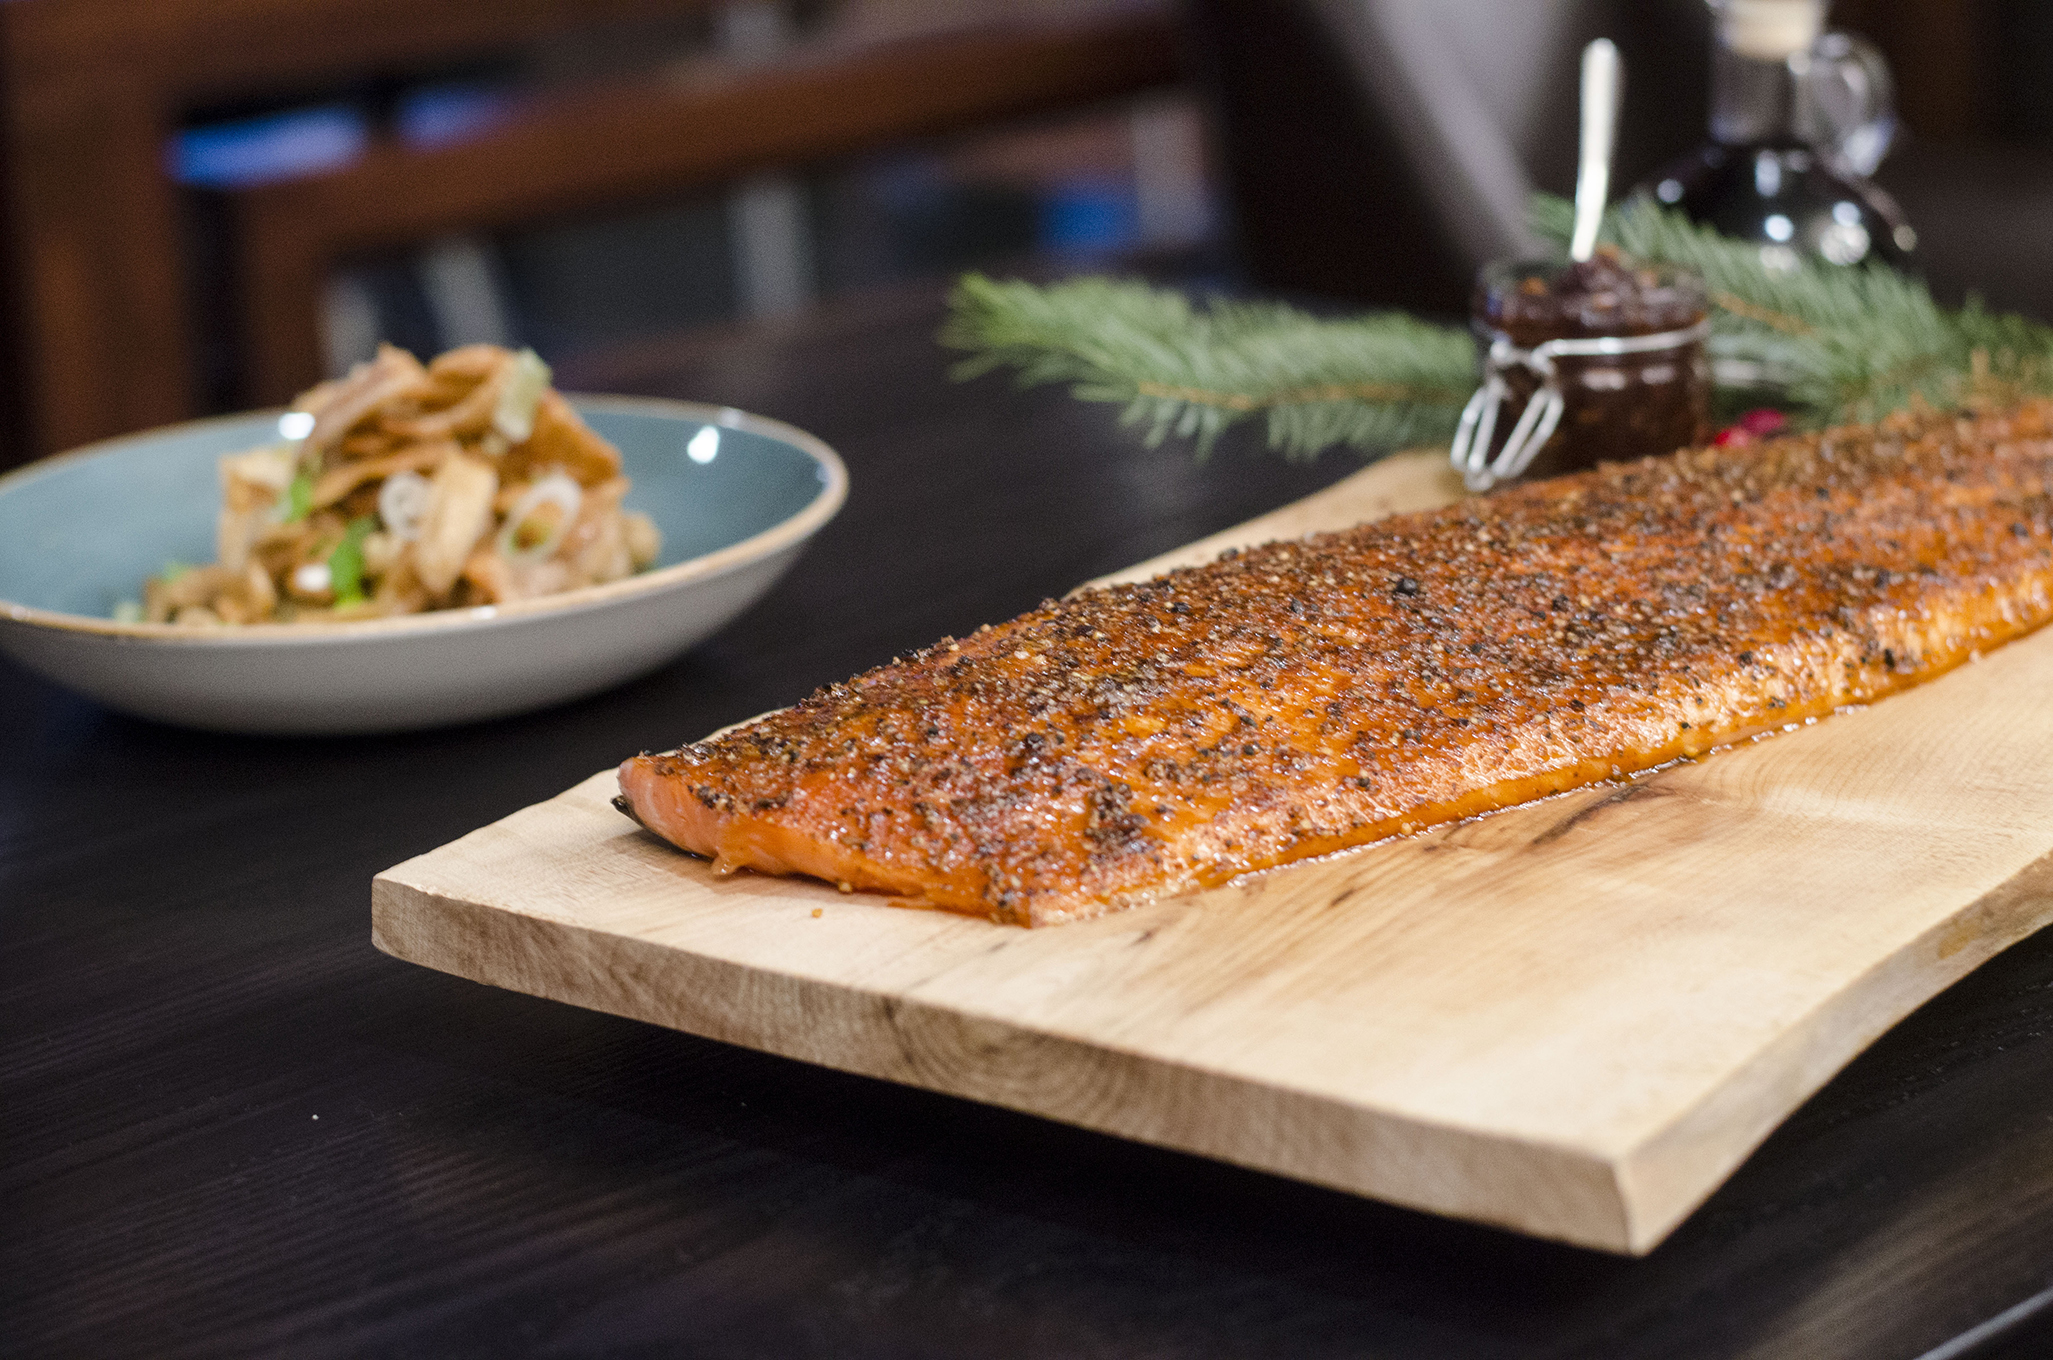 Apple Wood Smoked Coho Salmon from the Market Buffet within Caesars Windsor in Windsor, Ontario.